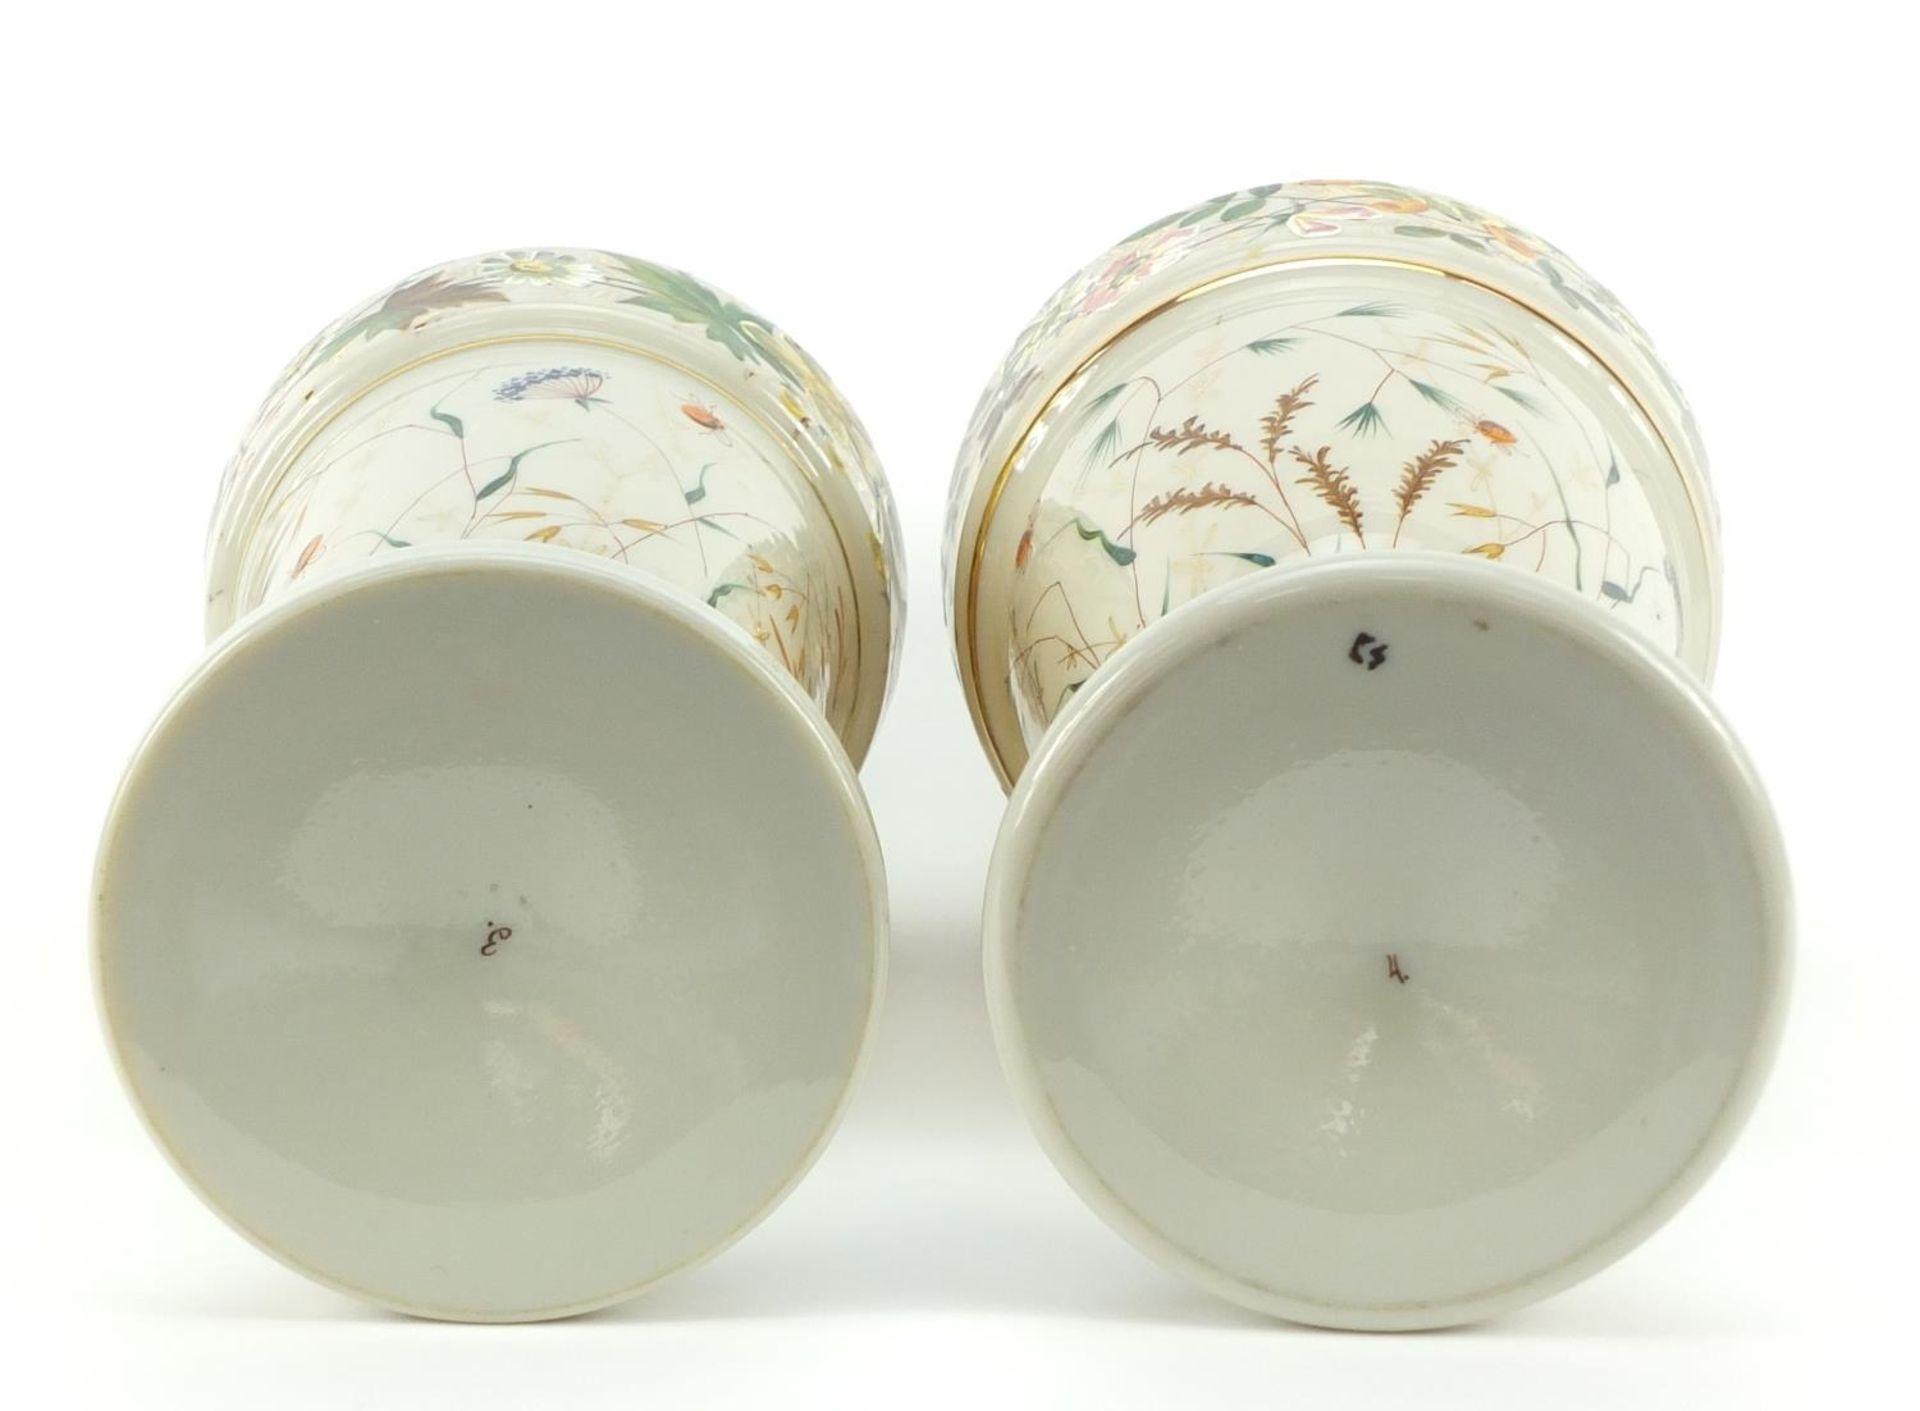 Matched pair of 19th century opaline glass vases, hand painted with flowers and insects amongst - Image 11 of 11